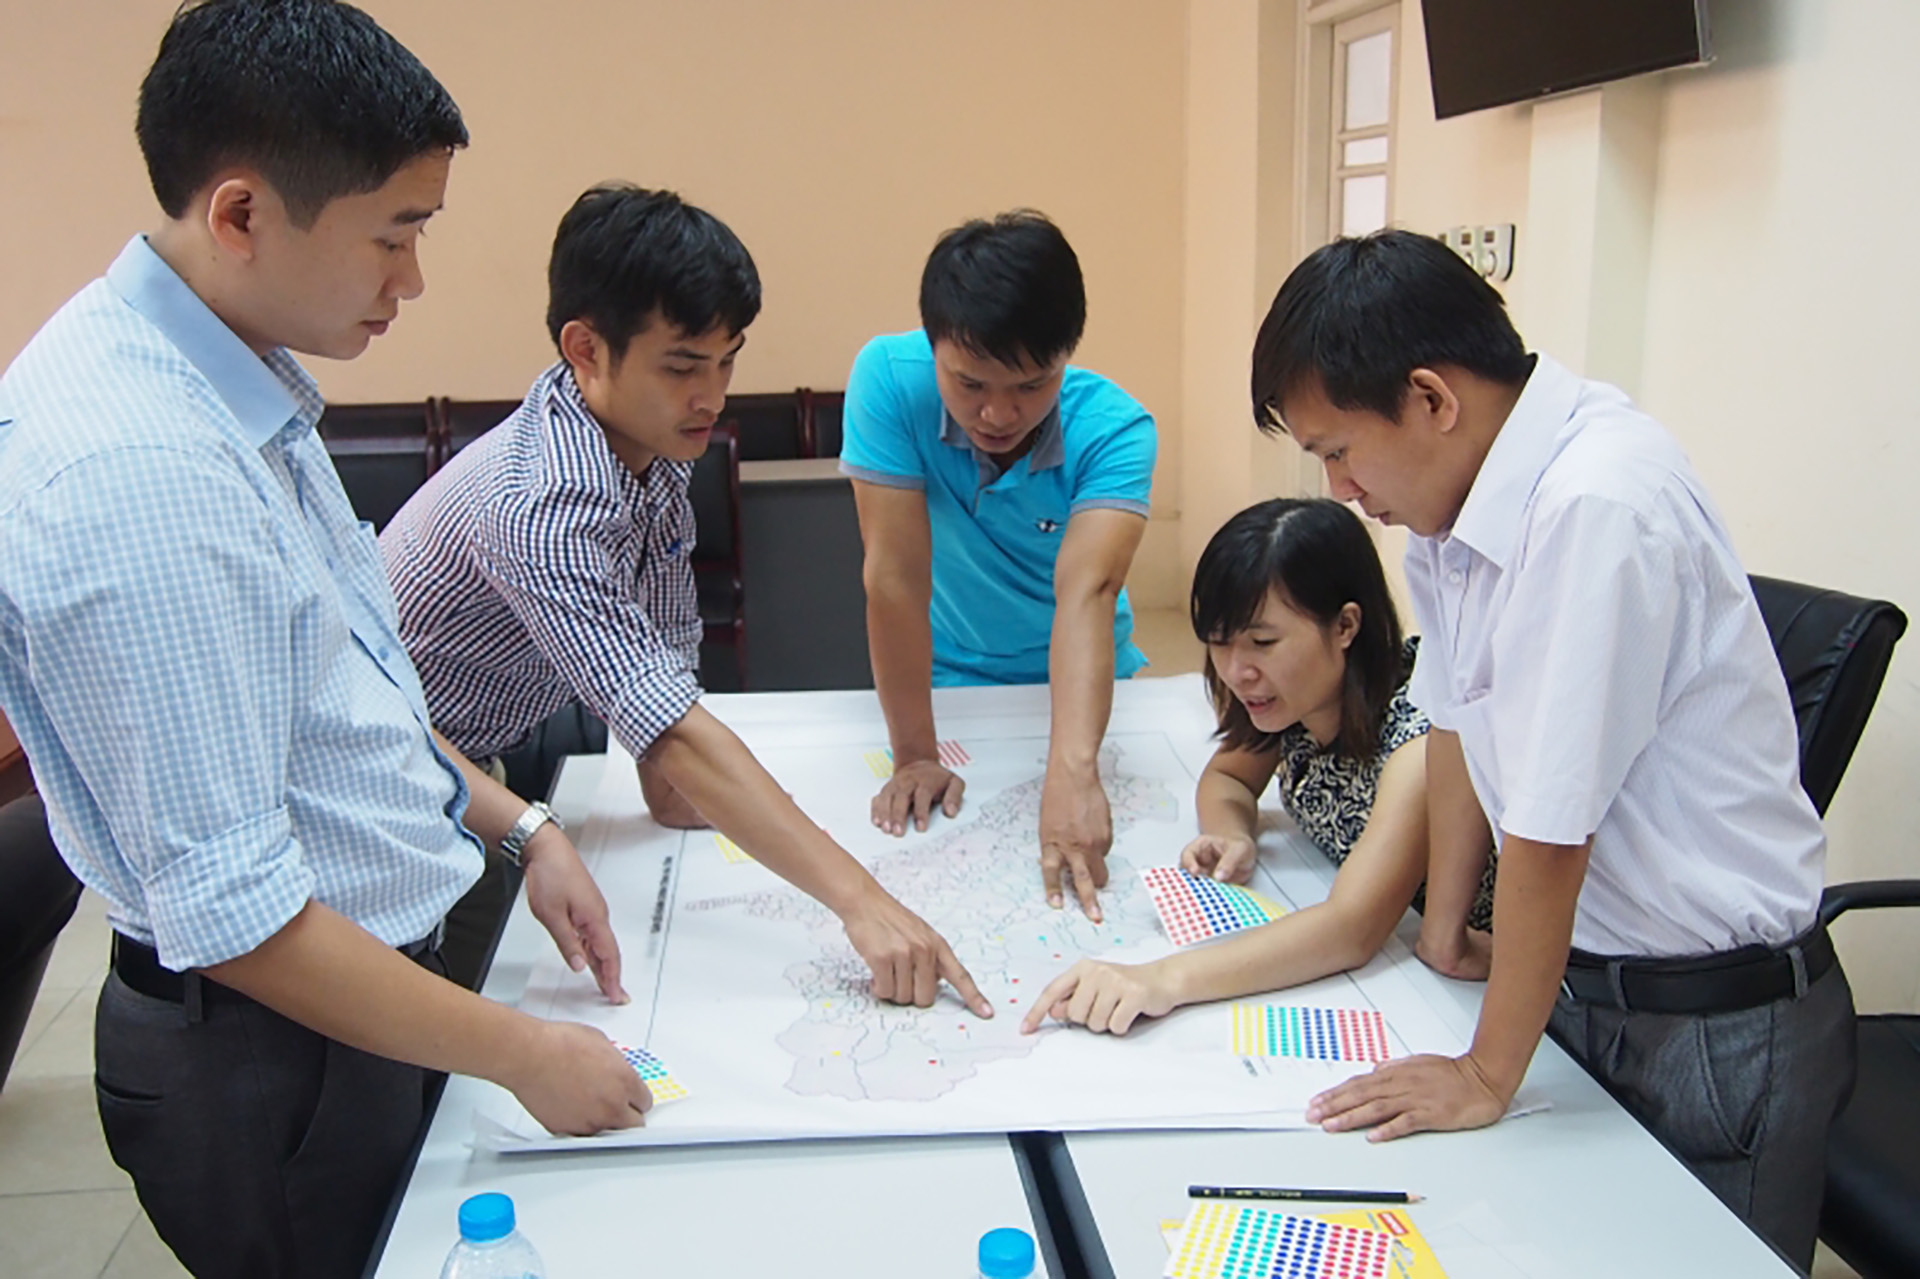 Practicing participatory mapping techniques in Viet Nam